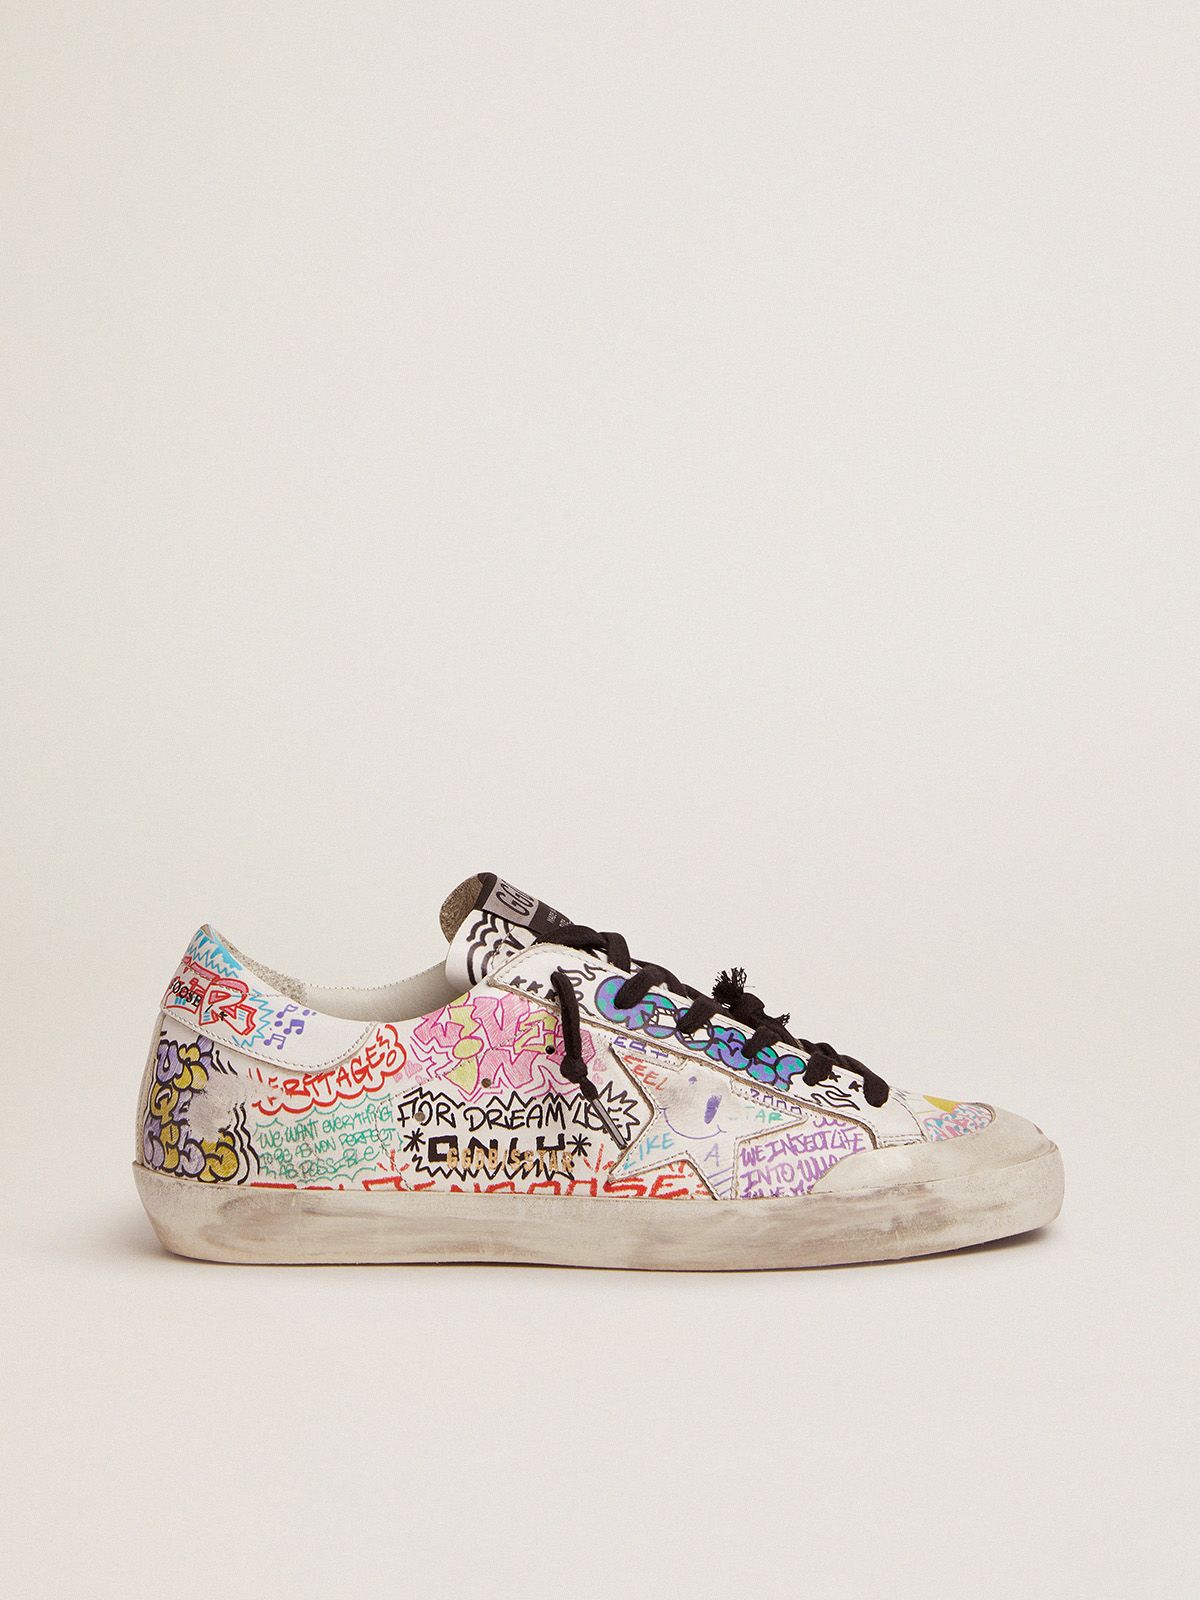 Sneakers Uomo Golden Goose Super-Star sneakers in white leather with multicolored graffiti print